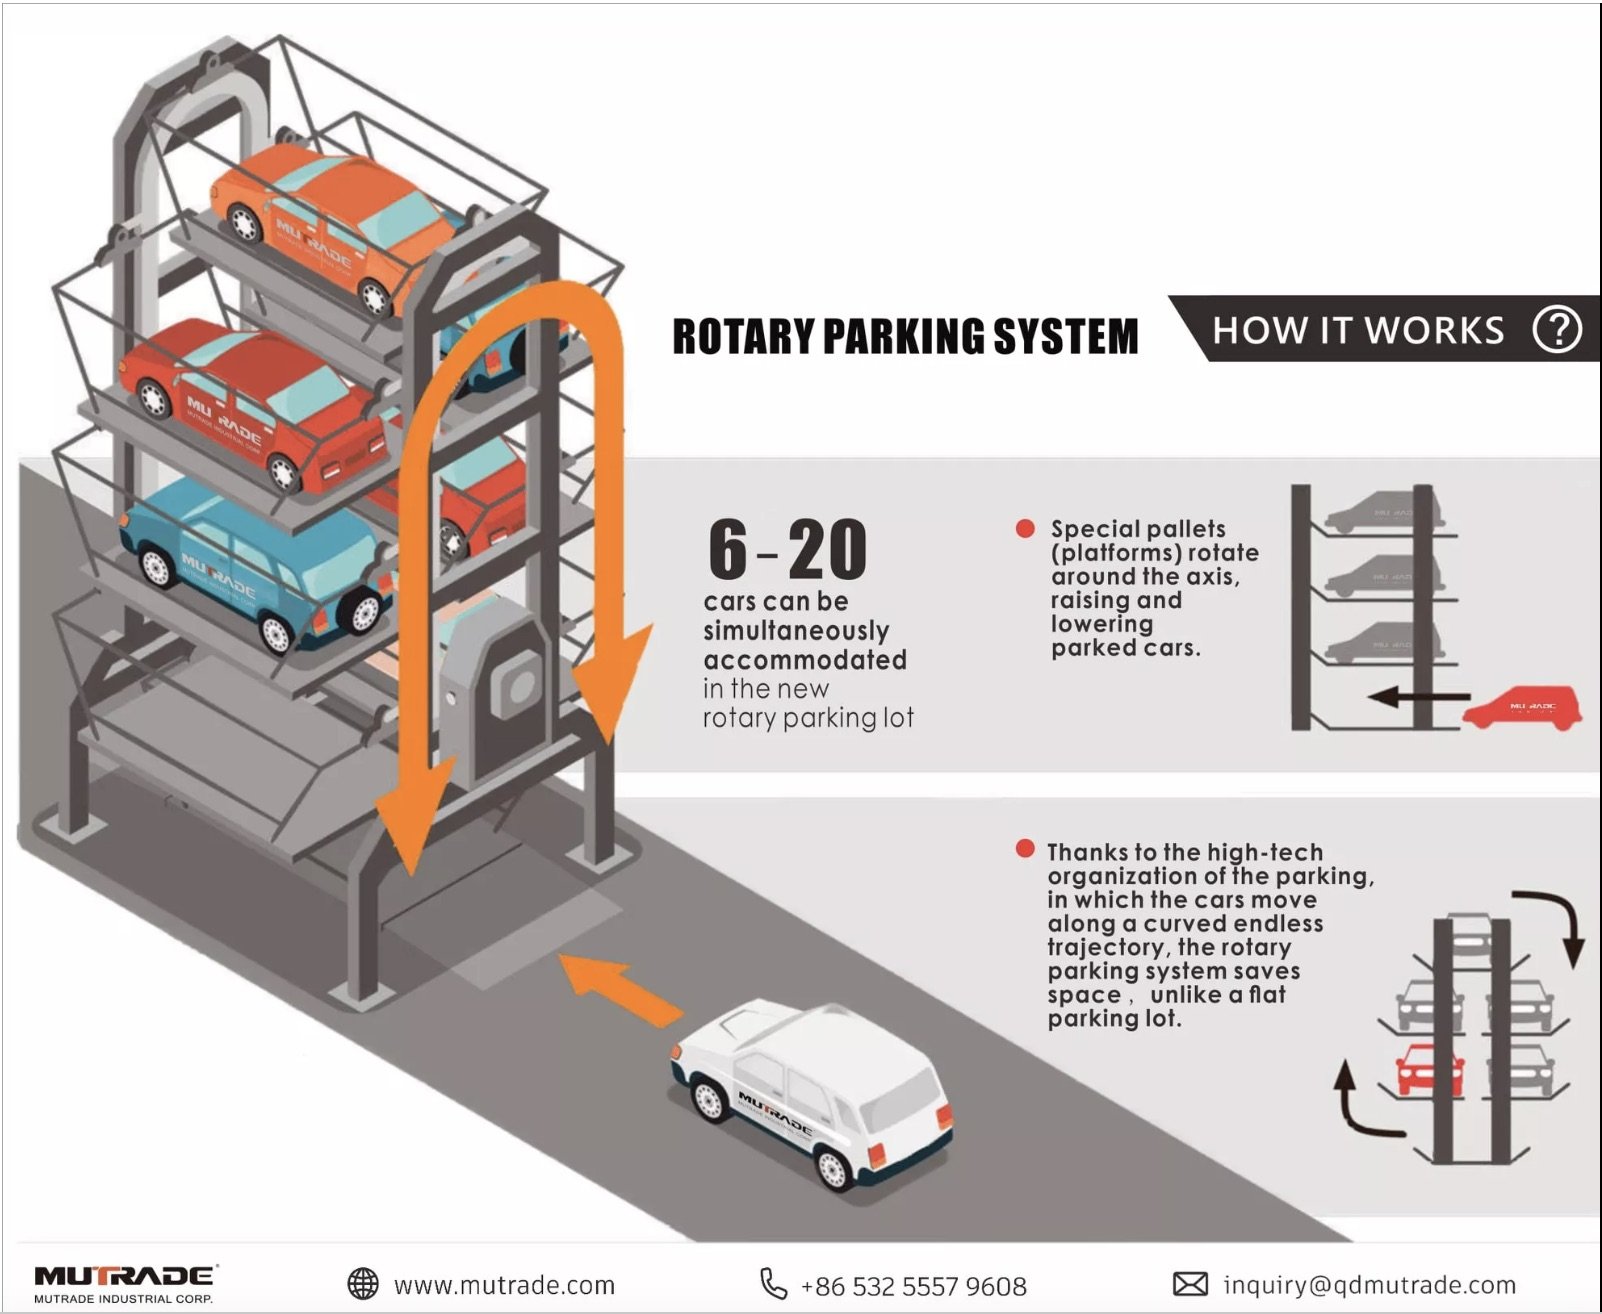 EVOLUTION OF PARKING EQUIPMENT: HOW TECHNOLOGIES ARE SHAPING THE FUTURE OF PARKING?